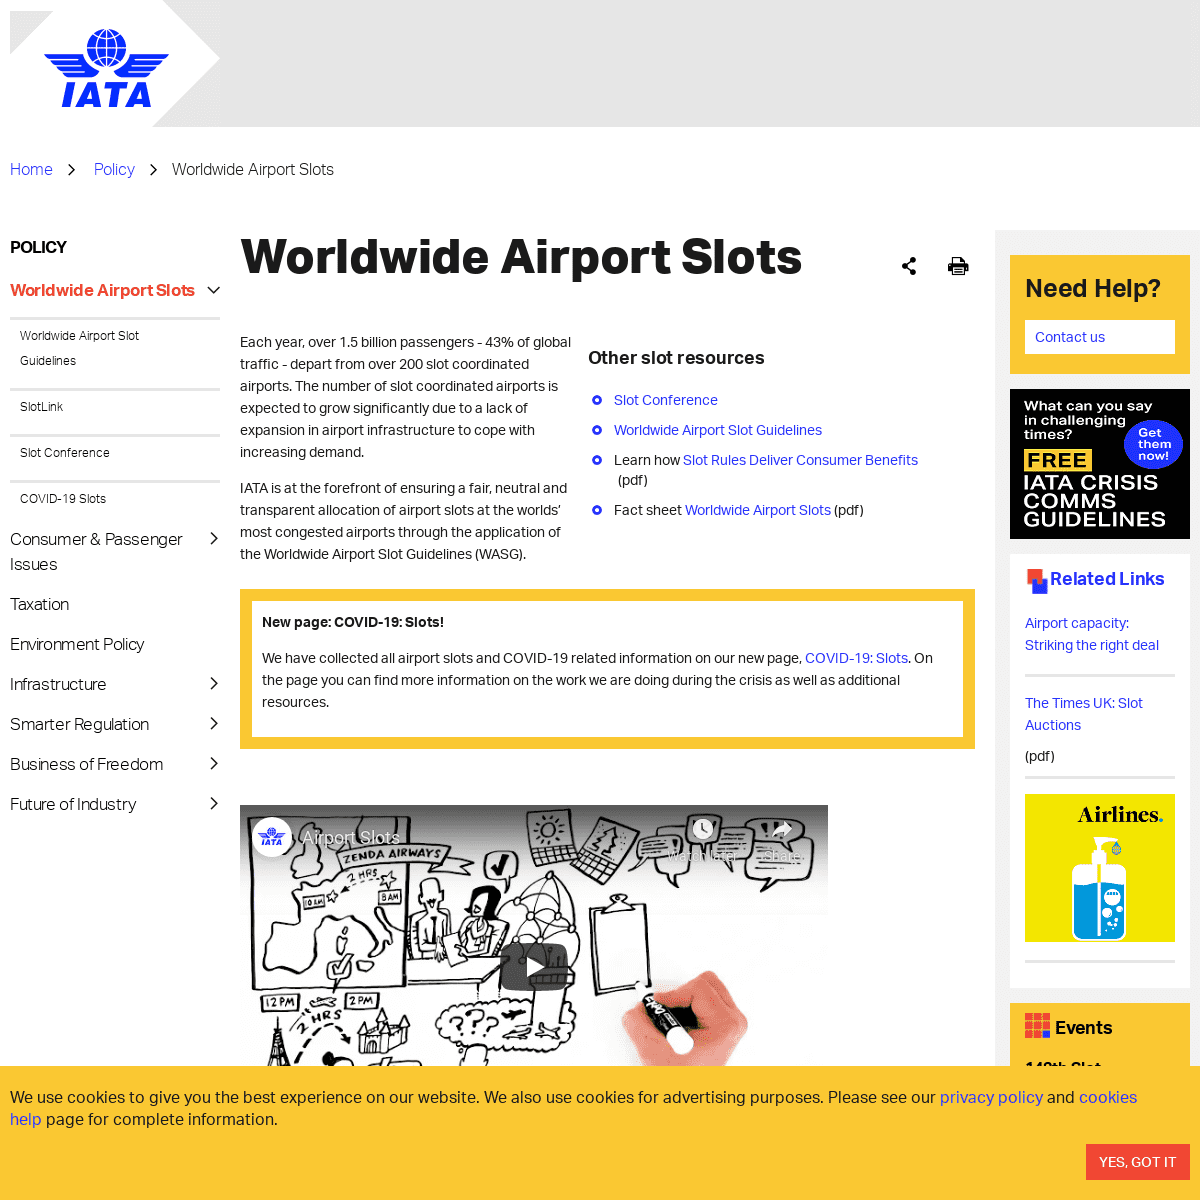 A complete backup of https://www.iata.org/en/policy/slots/